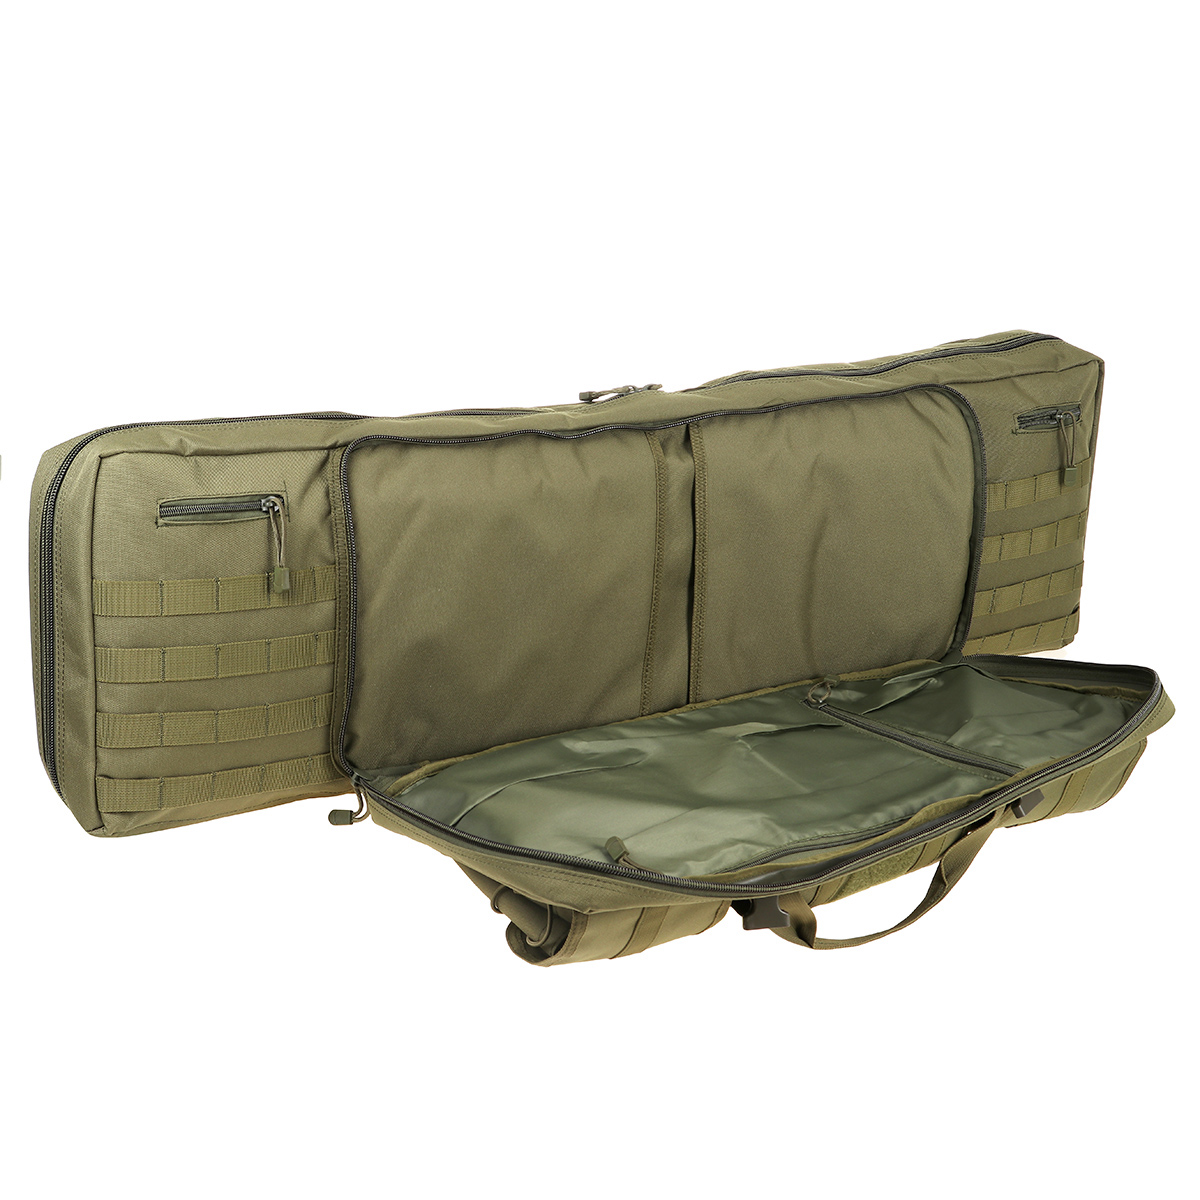 42-inch-Multifunctional-600D-Oxford-Cloth-Outdoor-Tactical-Storage-Bag-Double-Padded-Backpack-1854880-5